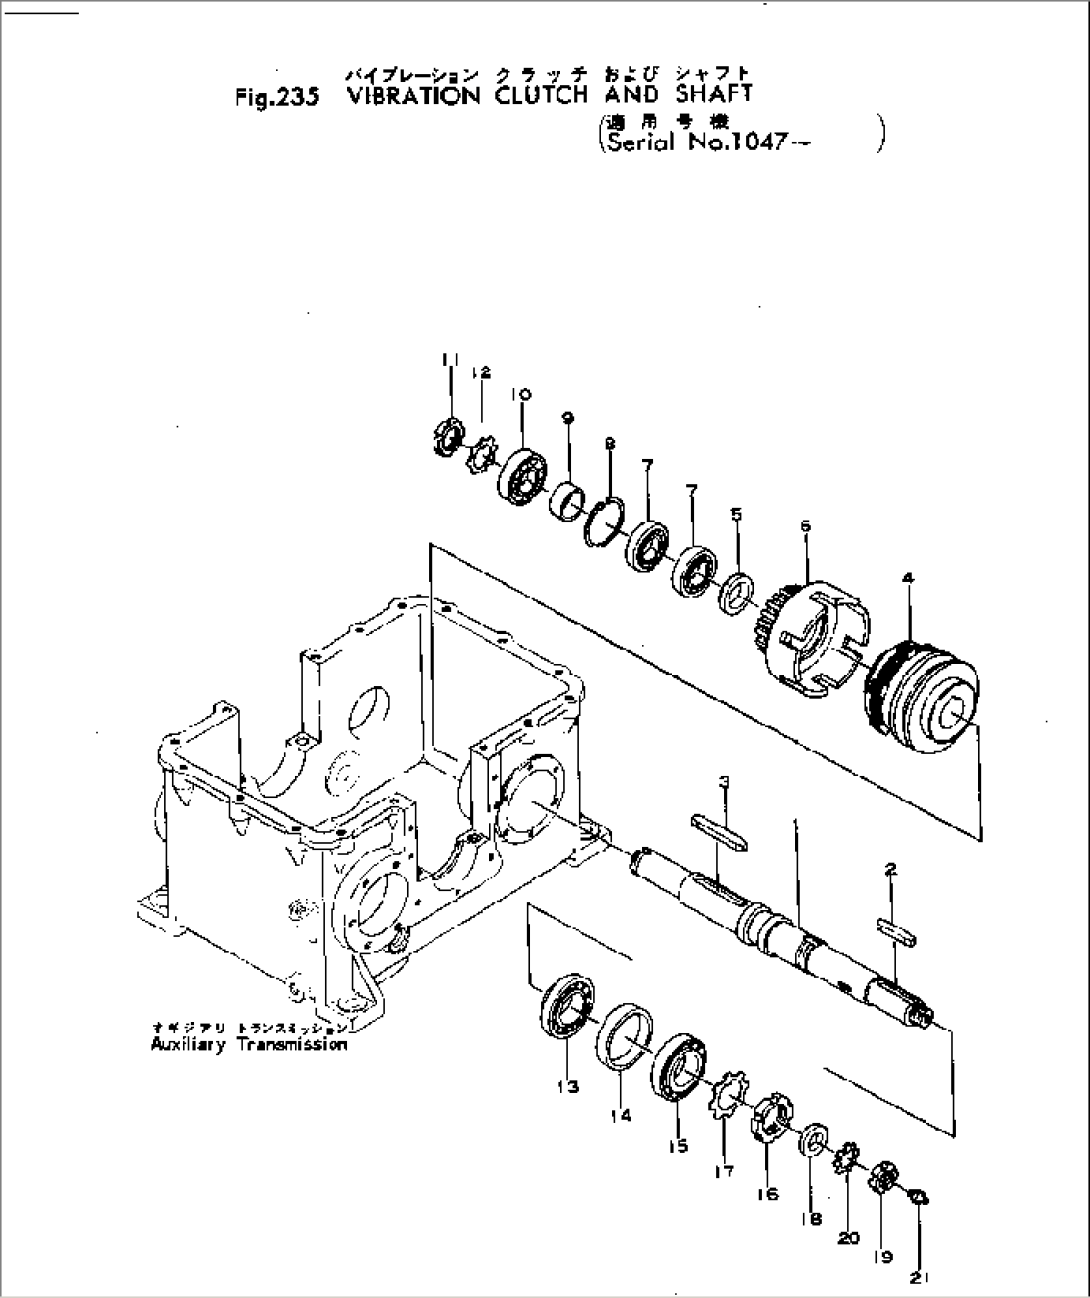 VIBRATION CLUTCH AND SHAFT